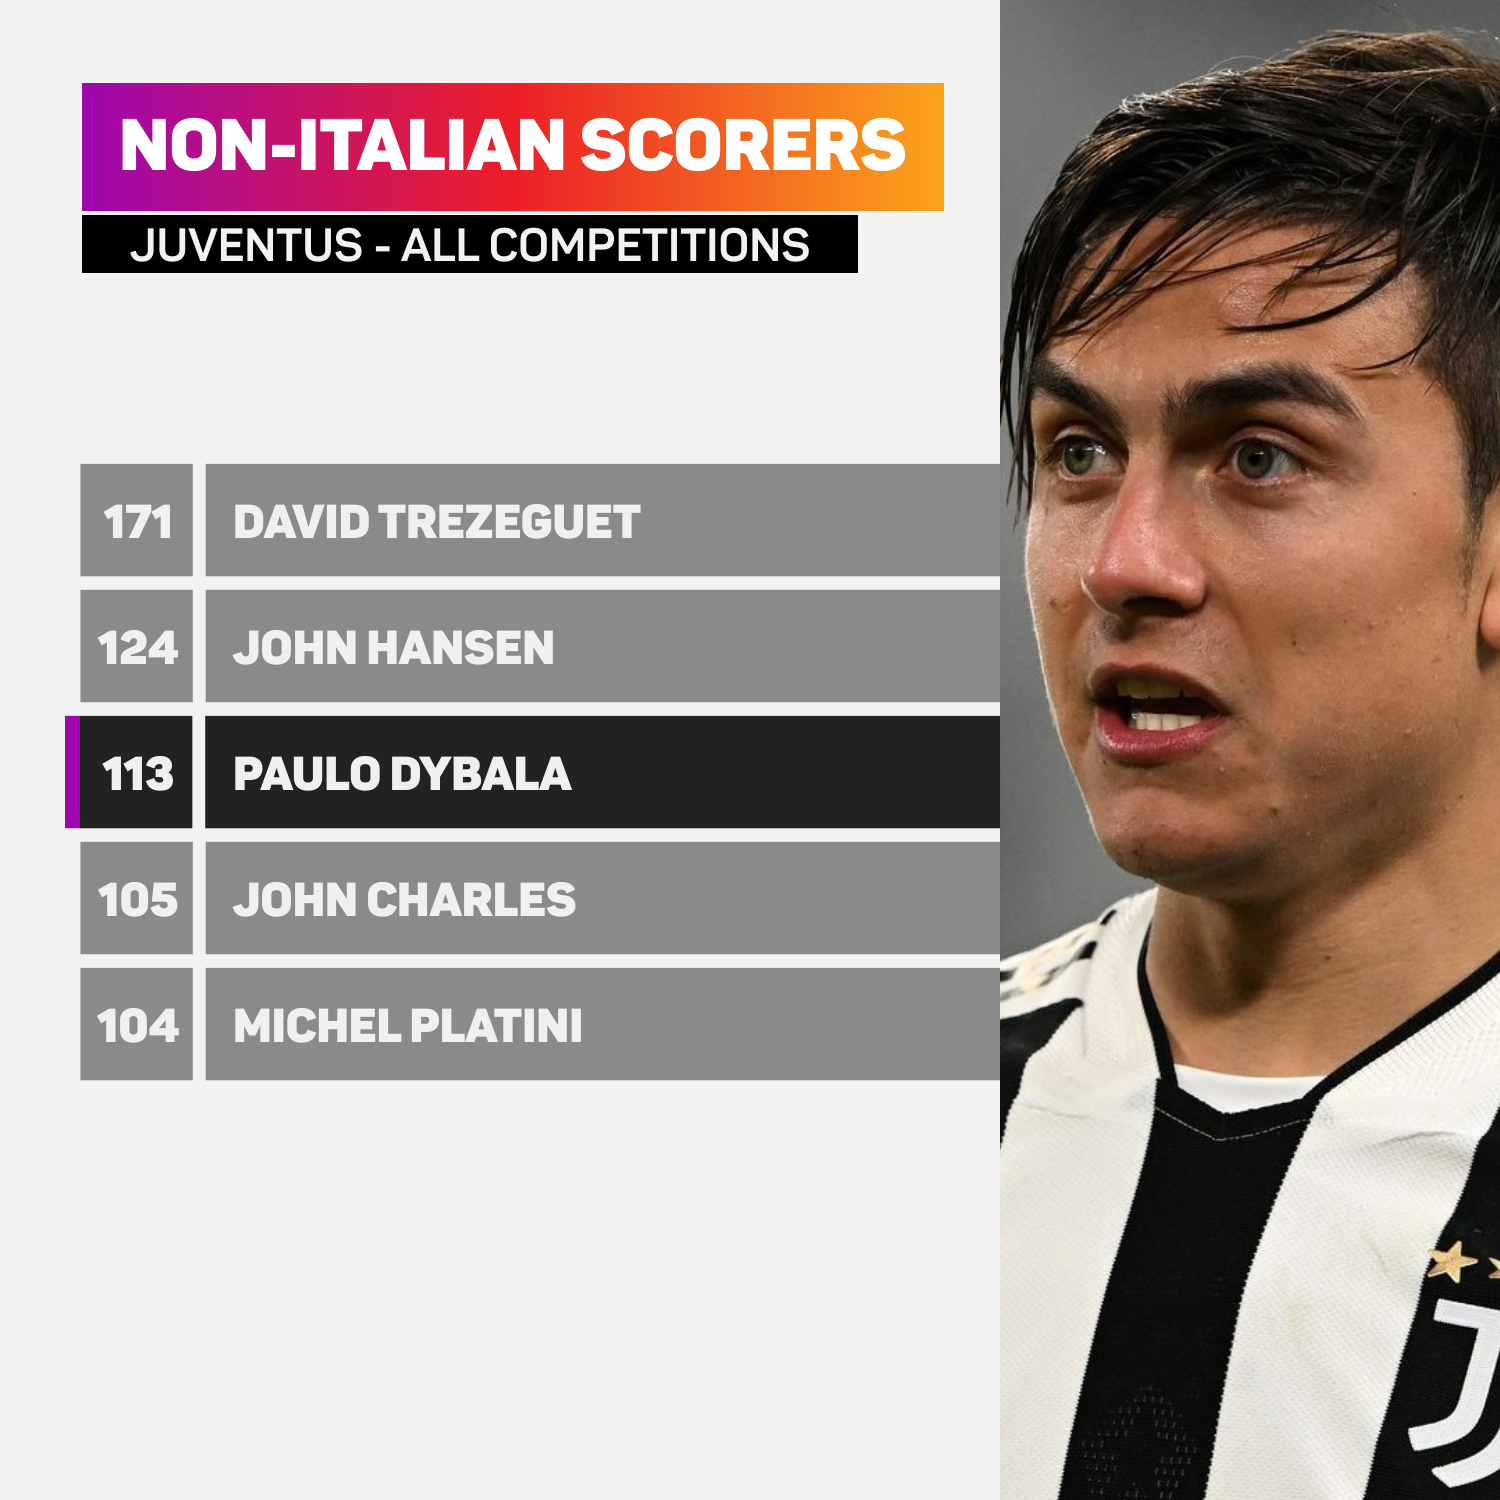 Non-Italian scorers for Juventus in all competitions